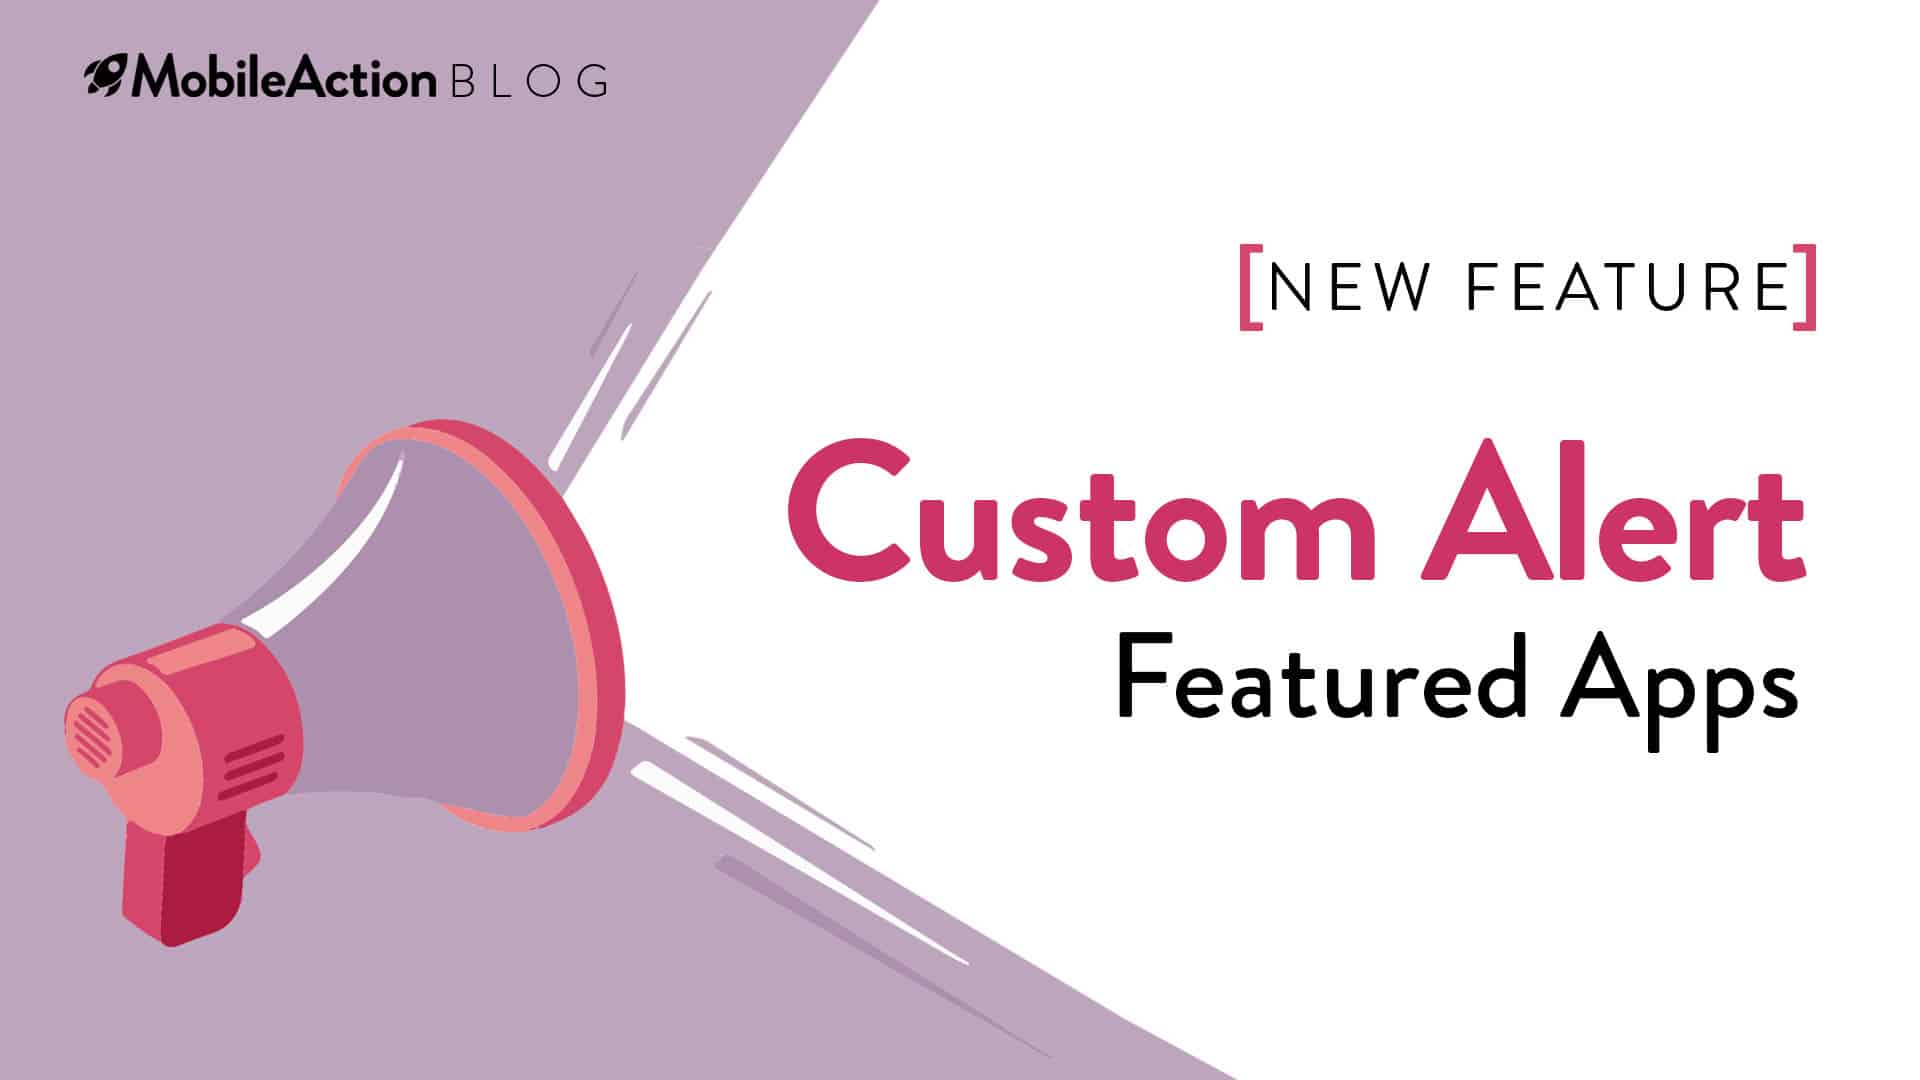 image showing new feature announcement about custom alert for featured apps